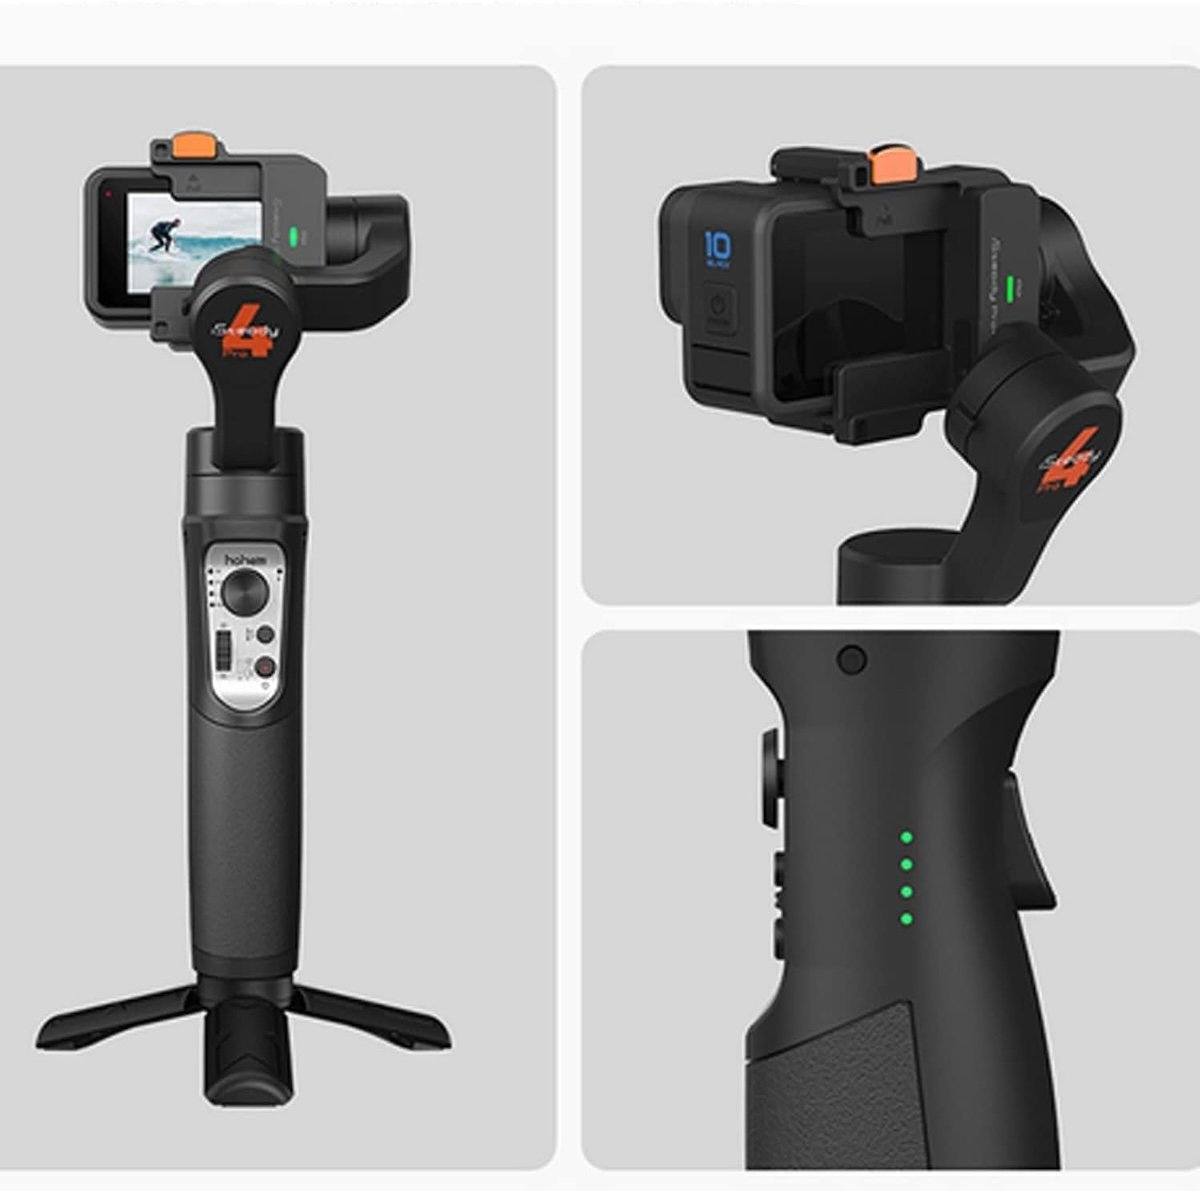 Three pictures showing our choice for the best GoPro gimbal, the Hohem iSteady Pro 4